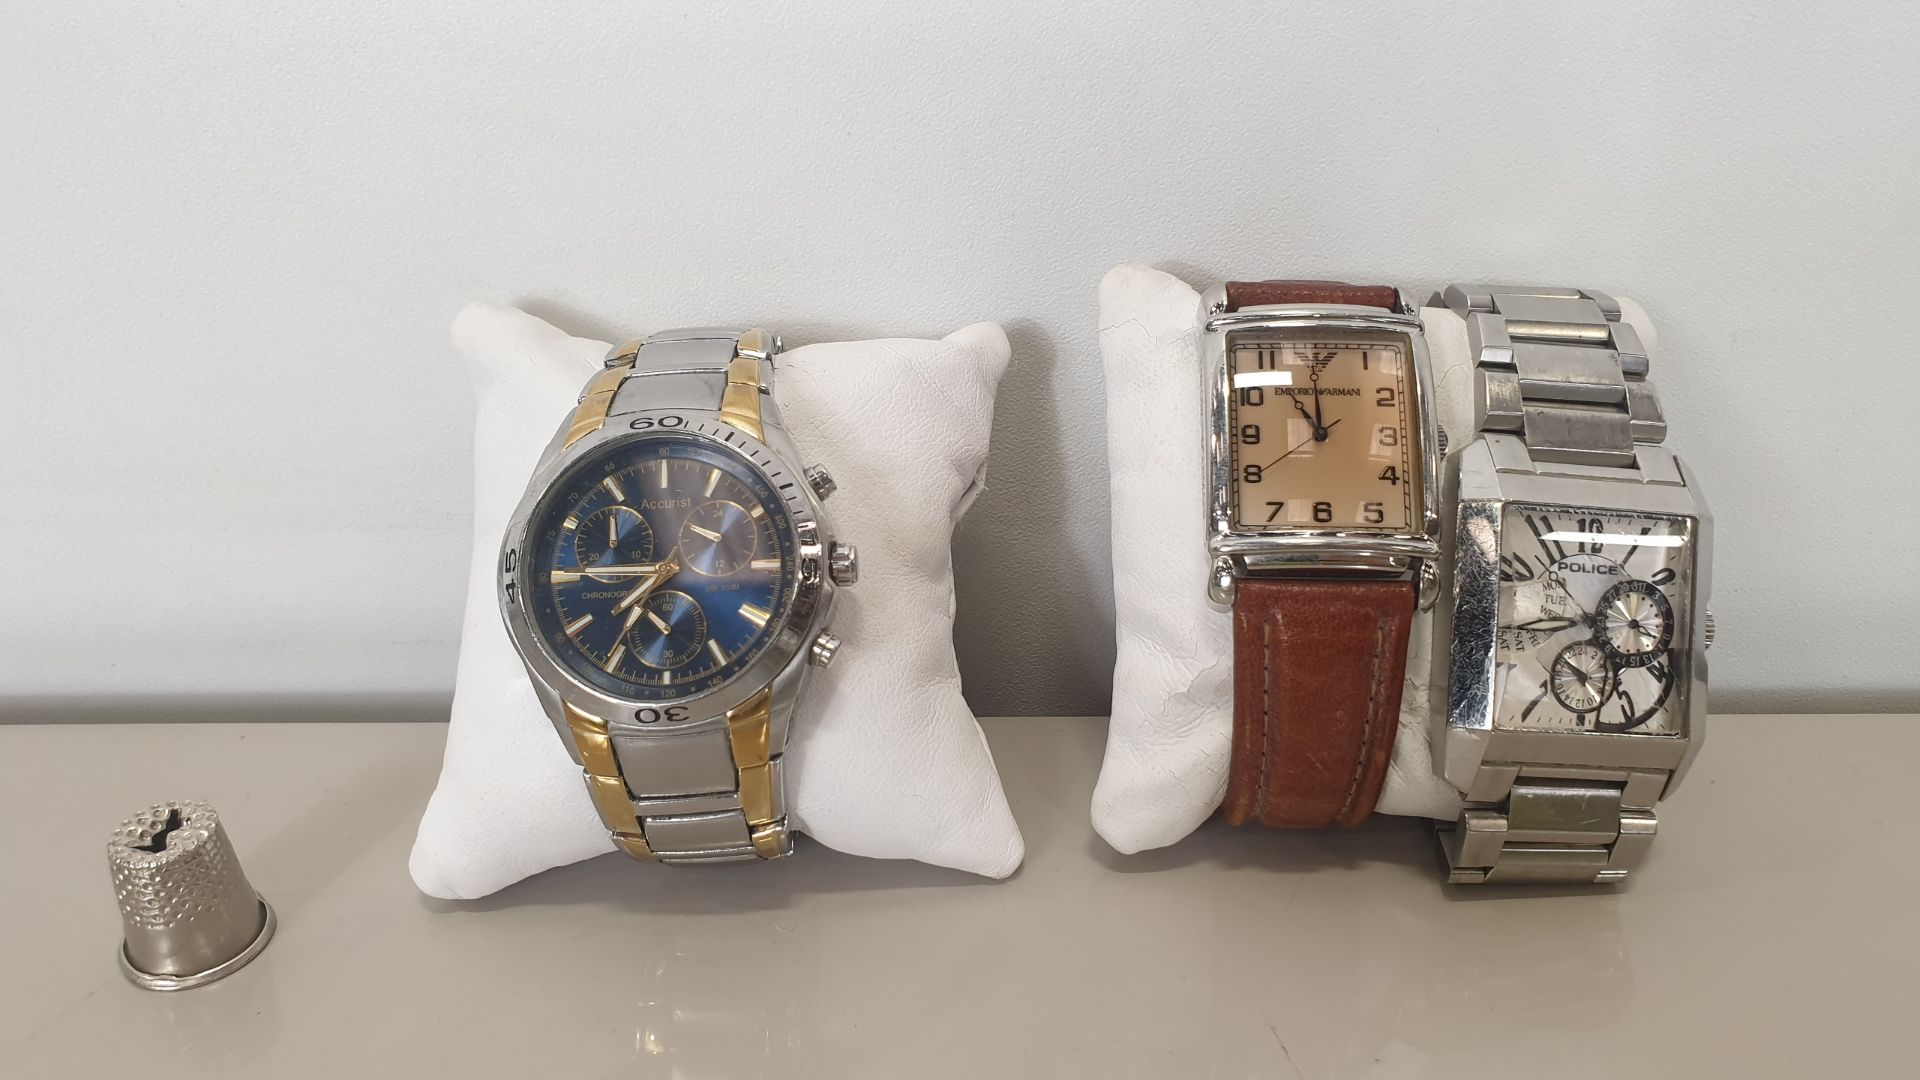 WATCH LOT IE. - EMPORIO ARMANI LEATHER STRAP WATCH - POLICE WATCH (PLEASE SEE PHOTOS FOR DAMAGE) -